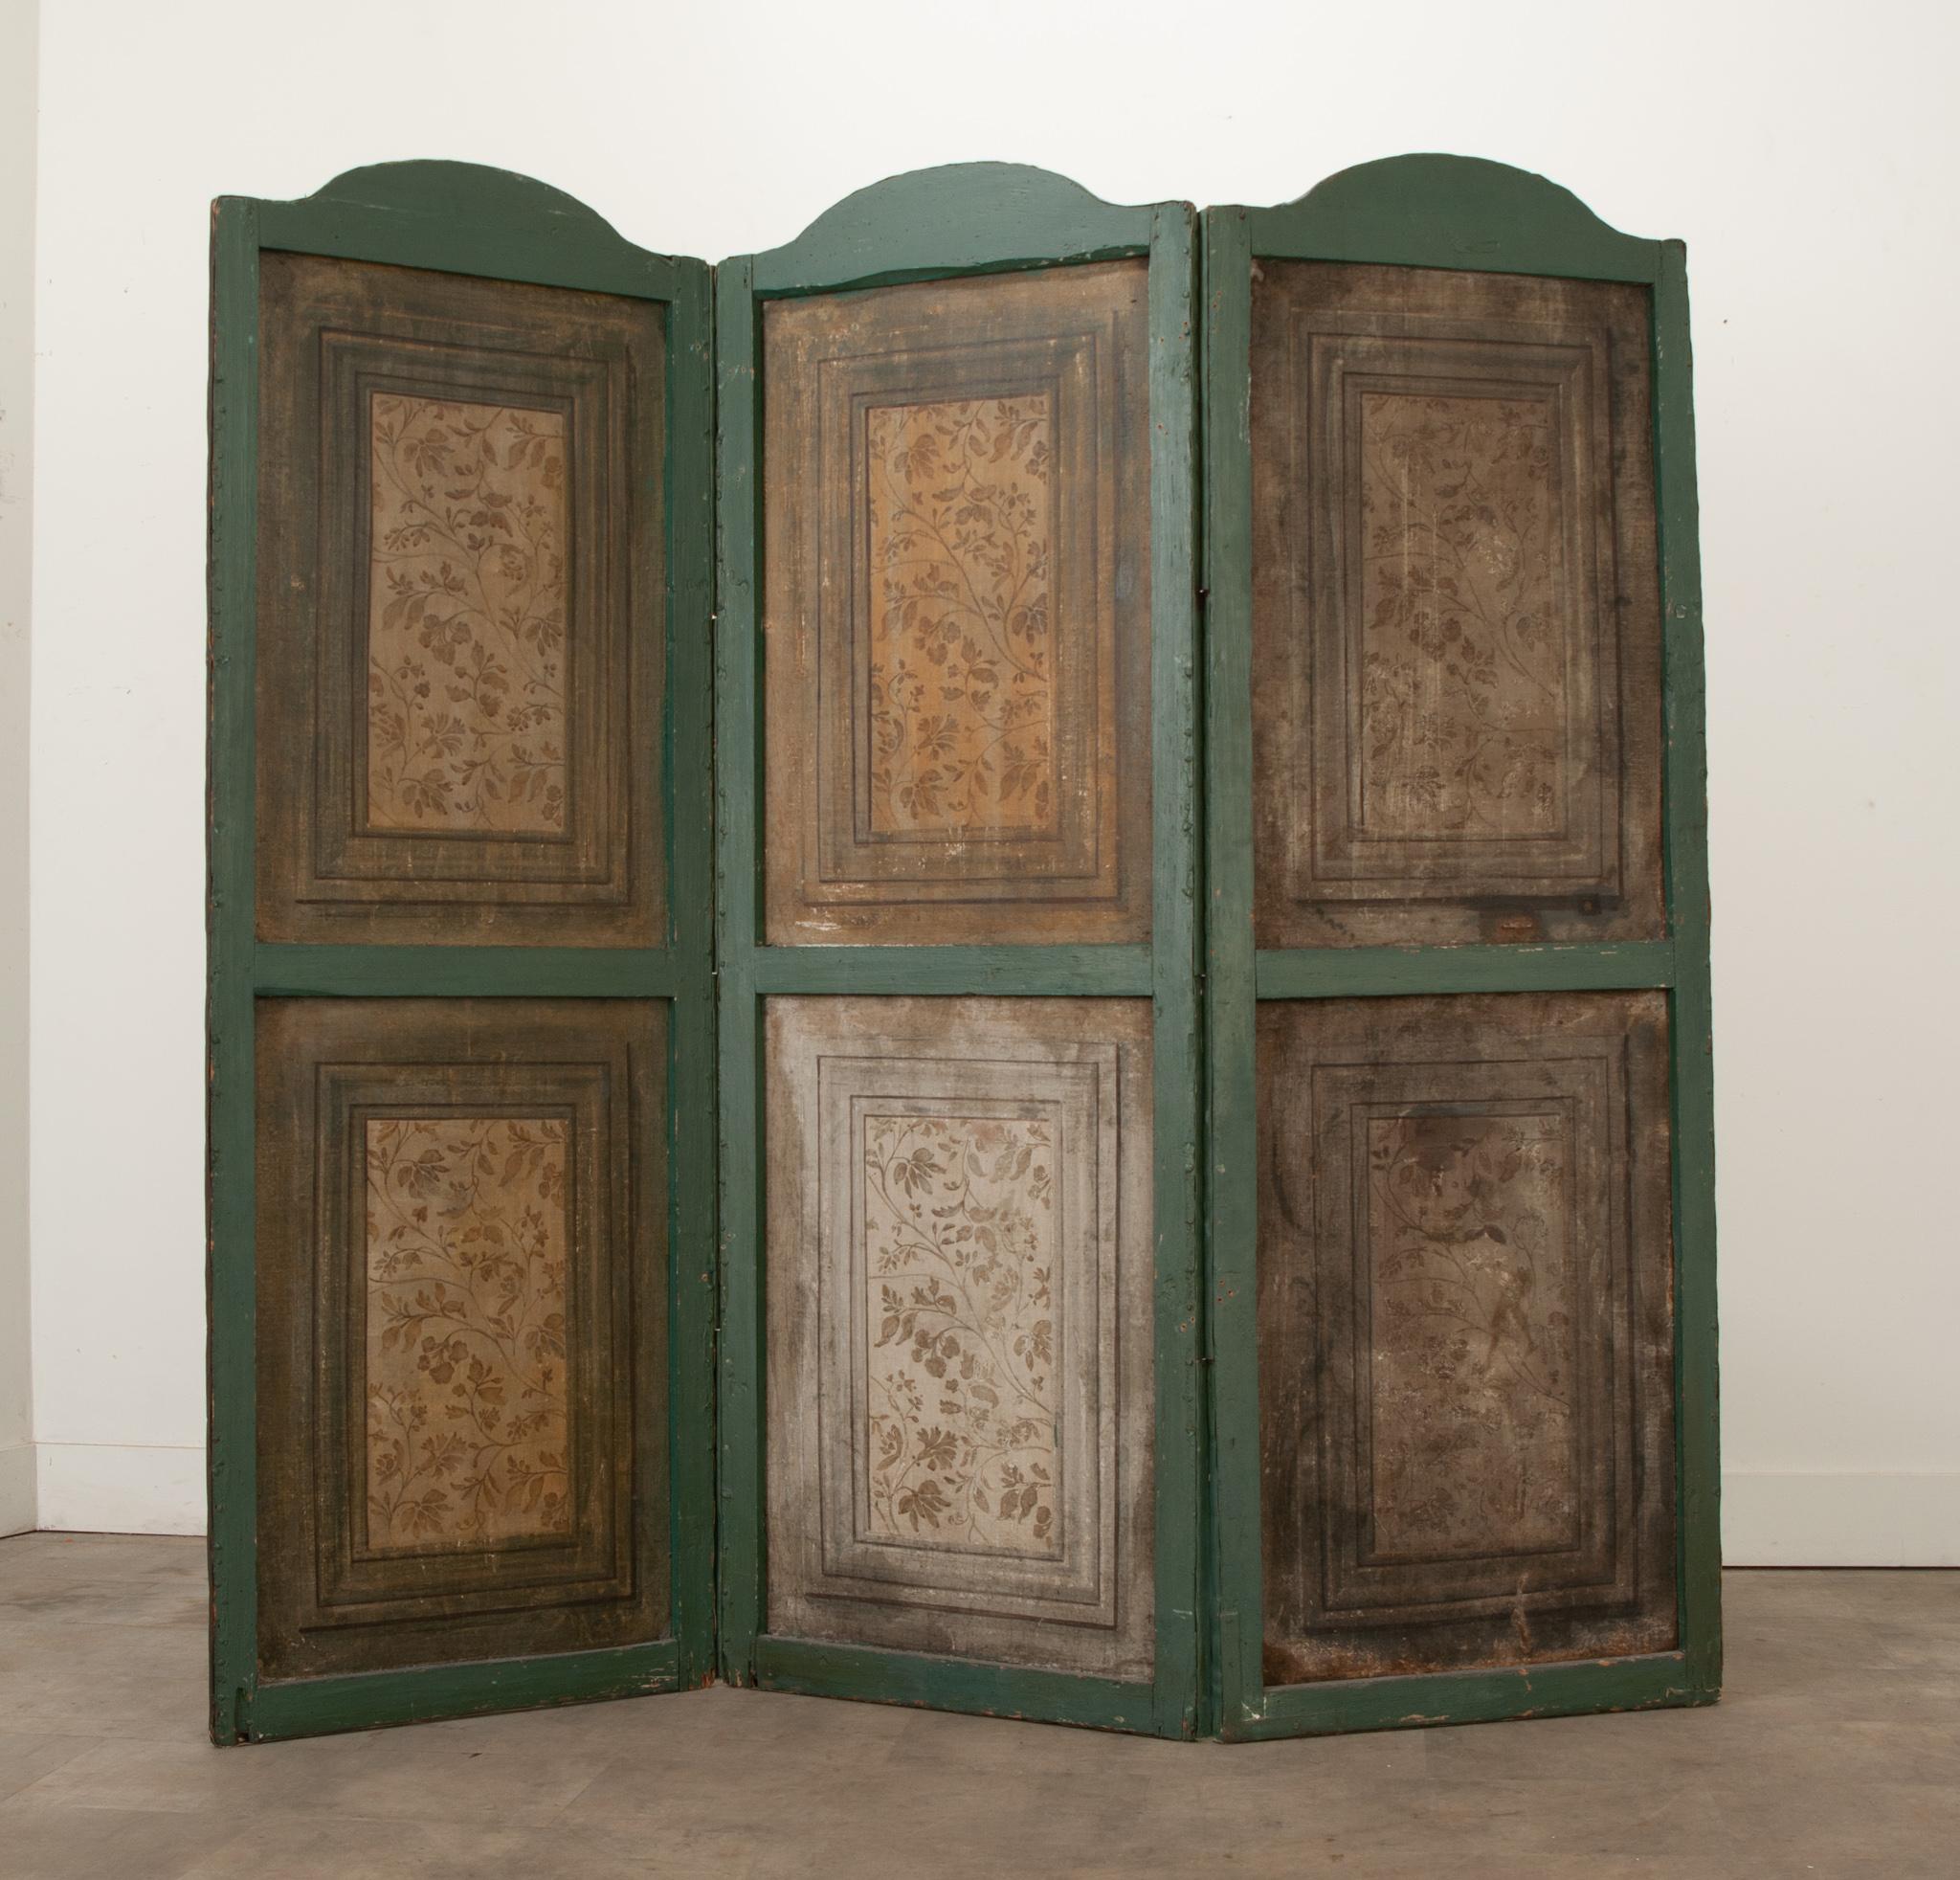 A French painted folding screen from the 19th Century. This antique folding screen features four tall panels with curved tops. On one side you’ll find painted floral designs on simple canvas panels, on the other side you’ll find a painted canvas